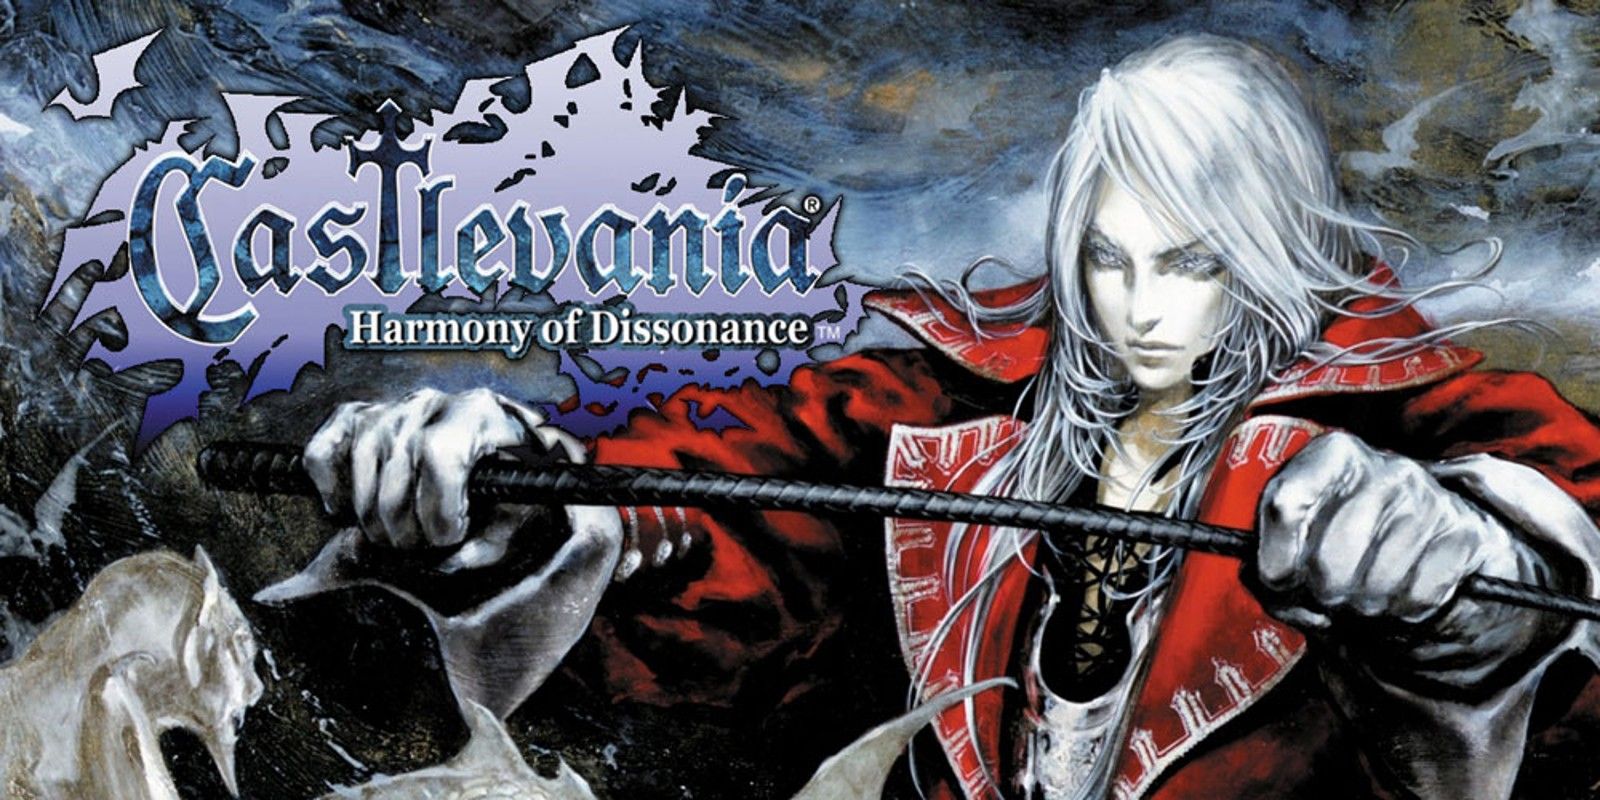 Castlevania Harmony of Dissonance title with Juste Belmont holding a whip